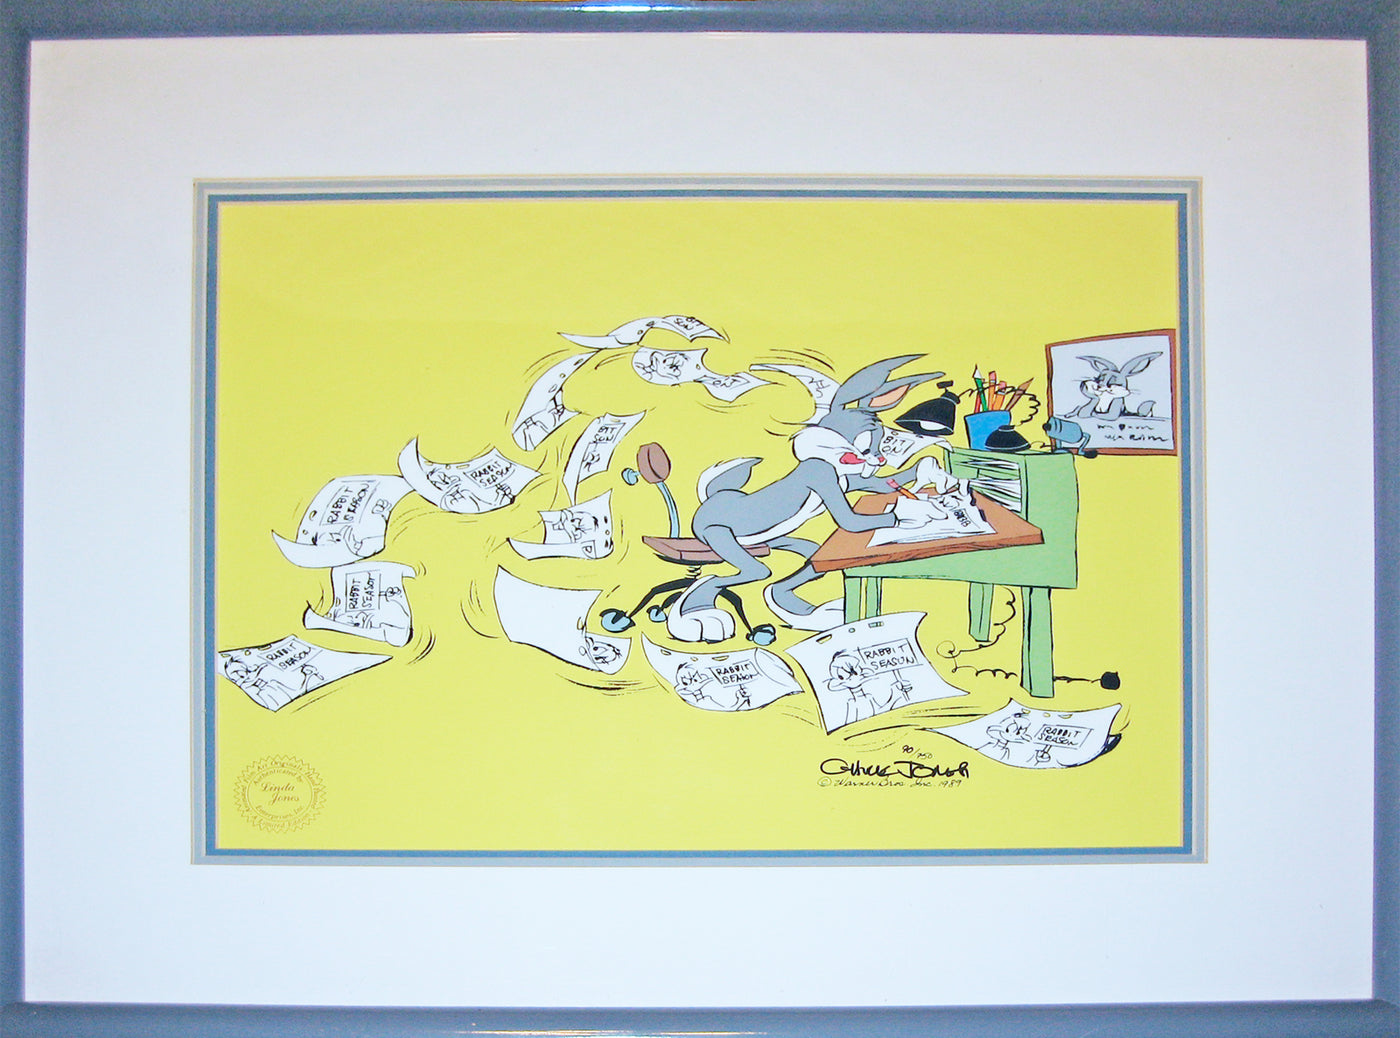 Original Warner Brothers Limited Edition Cel, "Chuck Amuck", featuring Bugs Bunny